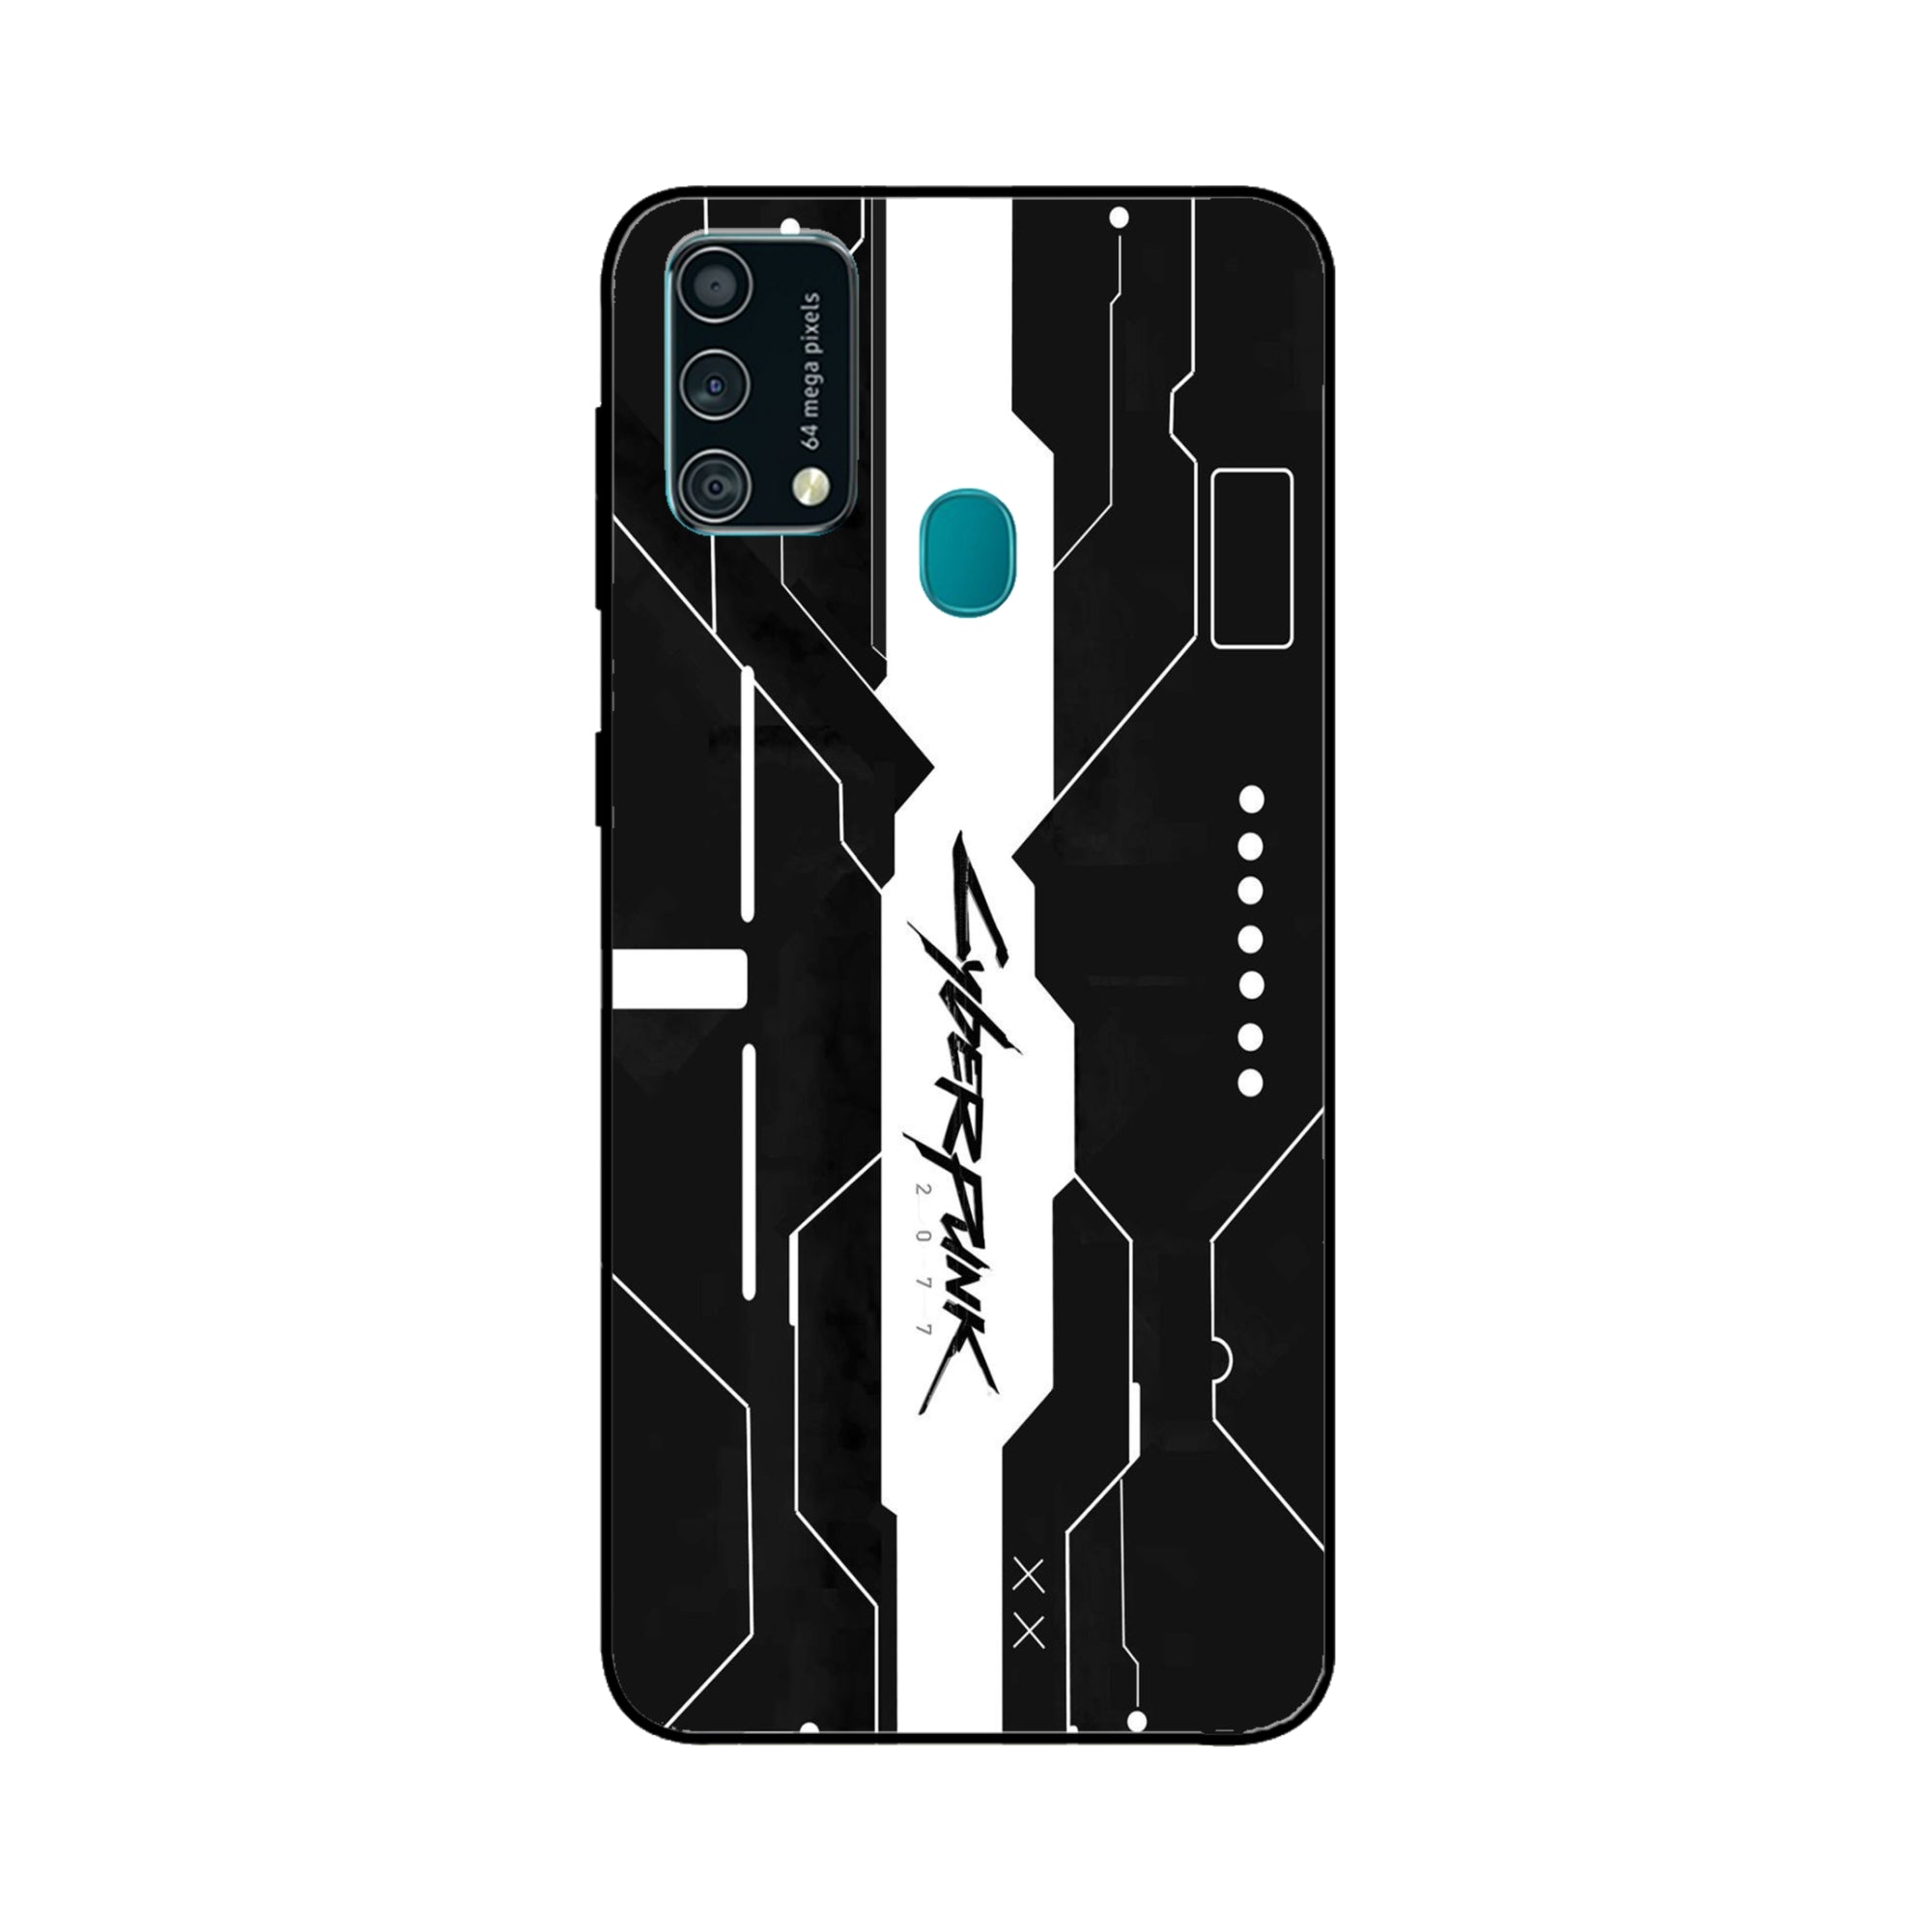 Buy Cyberpunk 2077 Art Metal-Silicon Back Mobile Phone Case/Cover For Samsung Galaxy F41 Online